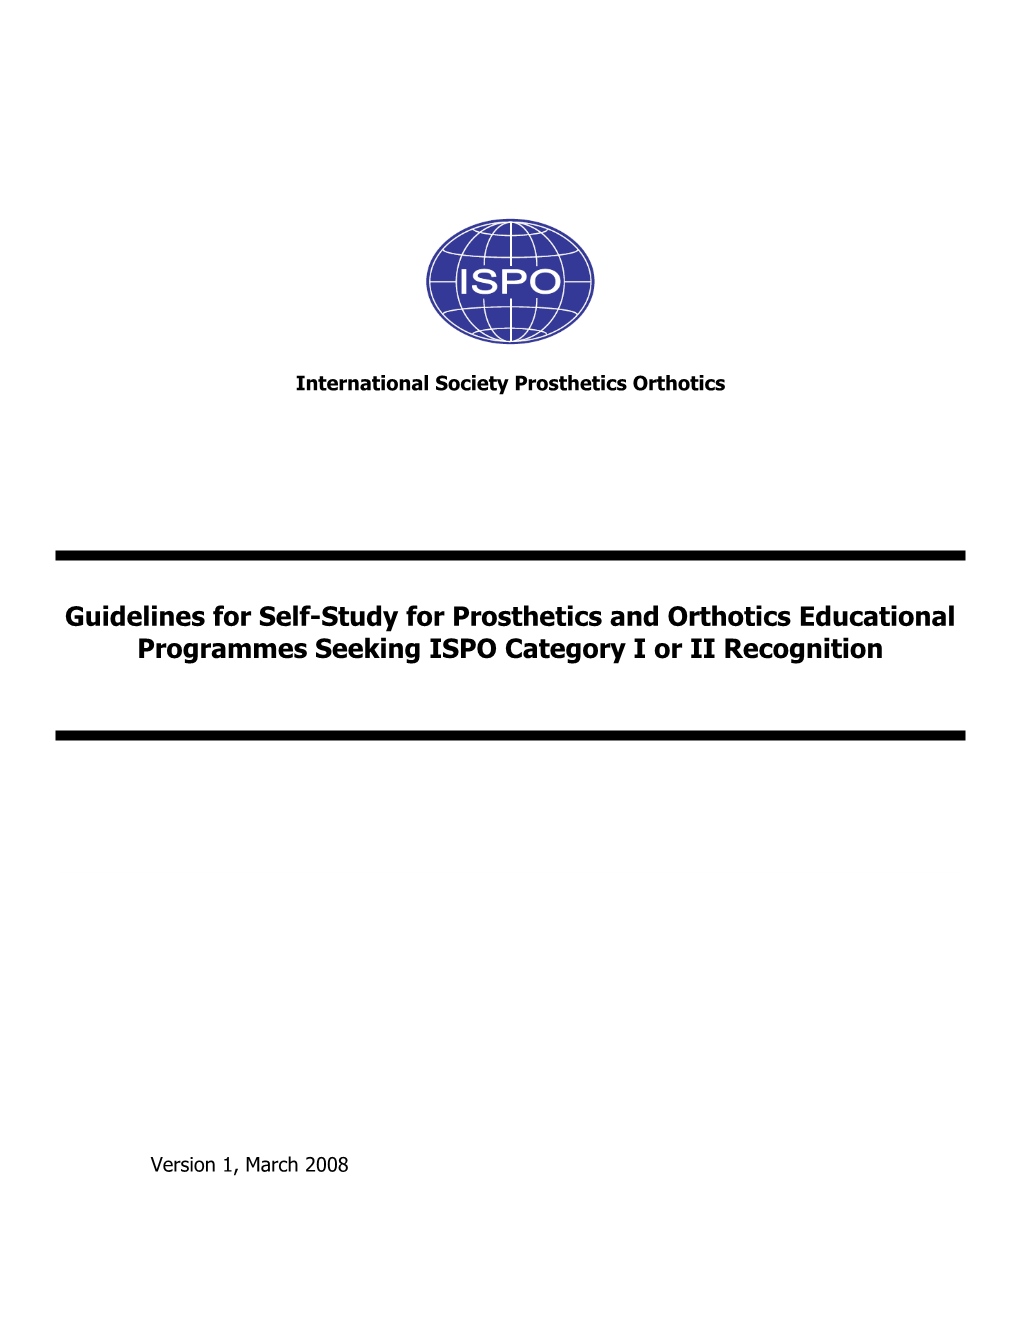 Guidelines for Self-Study Process for Education and Training Establishments Seeking ISPO